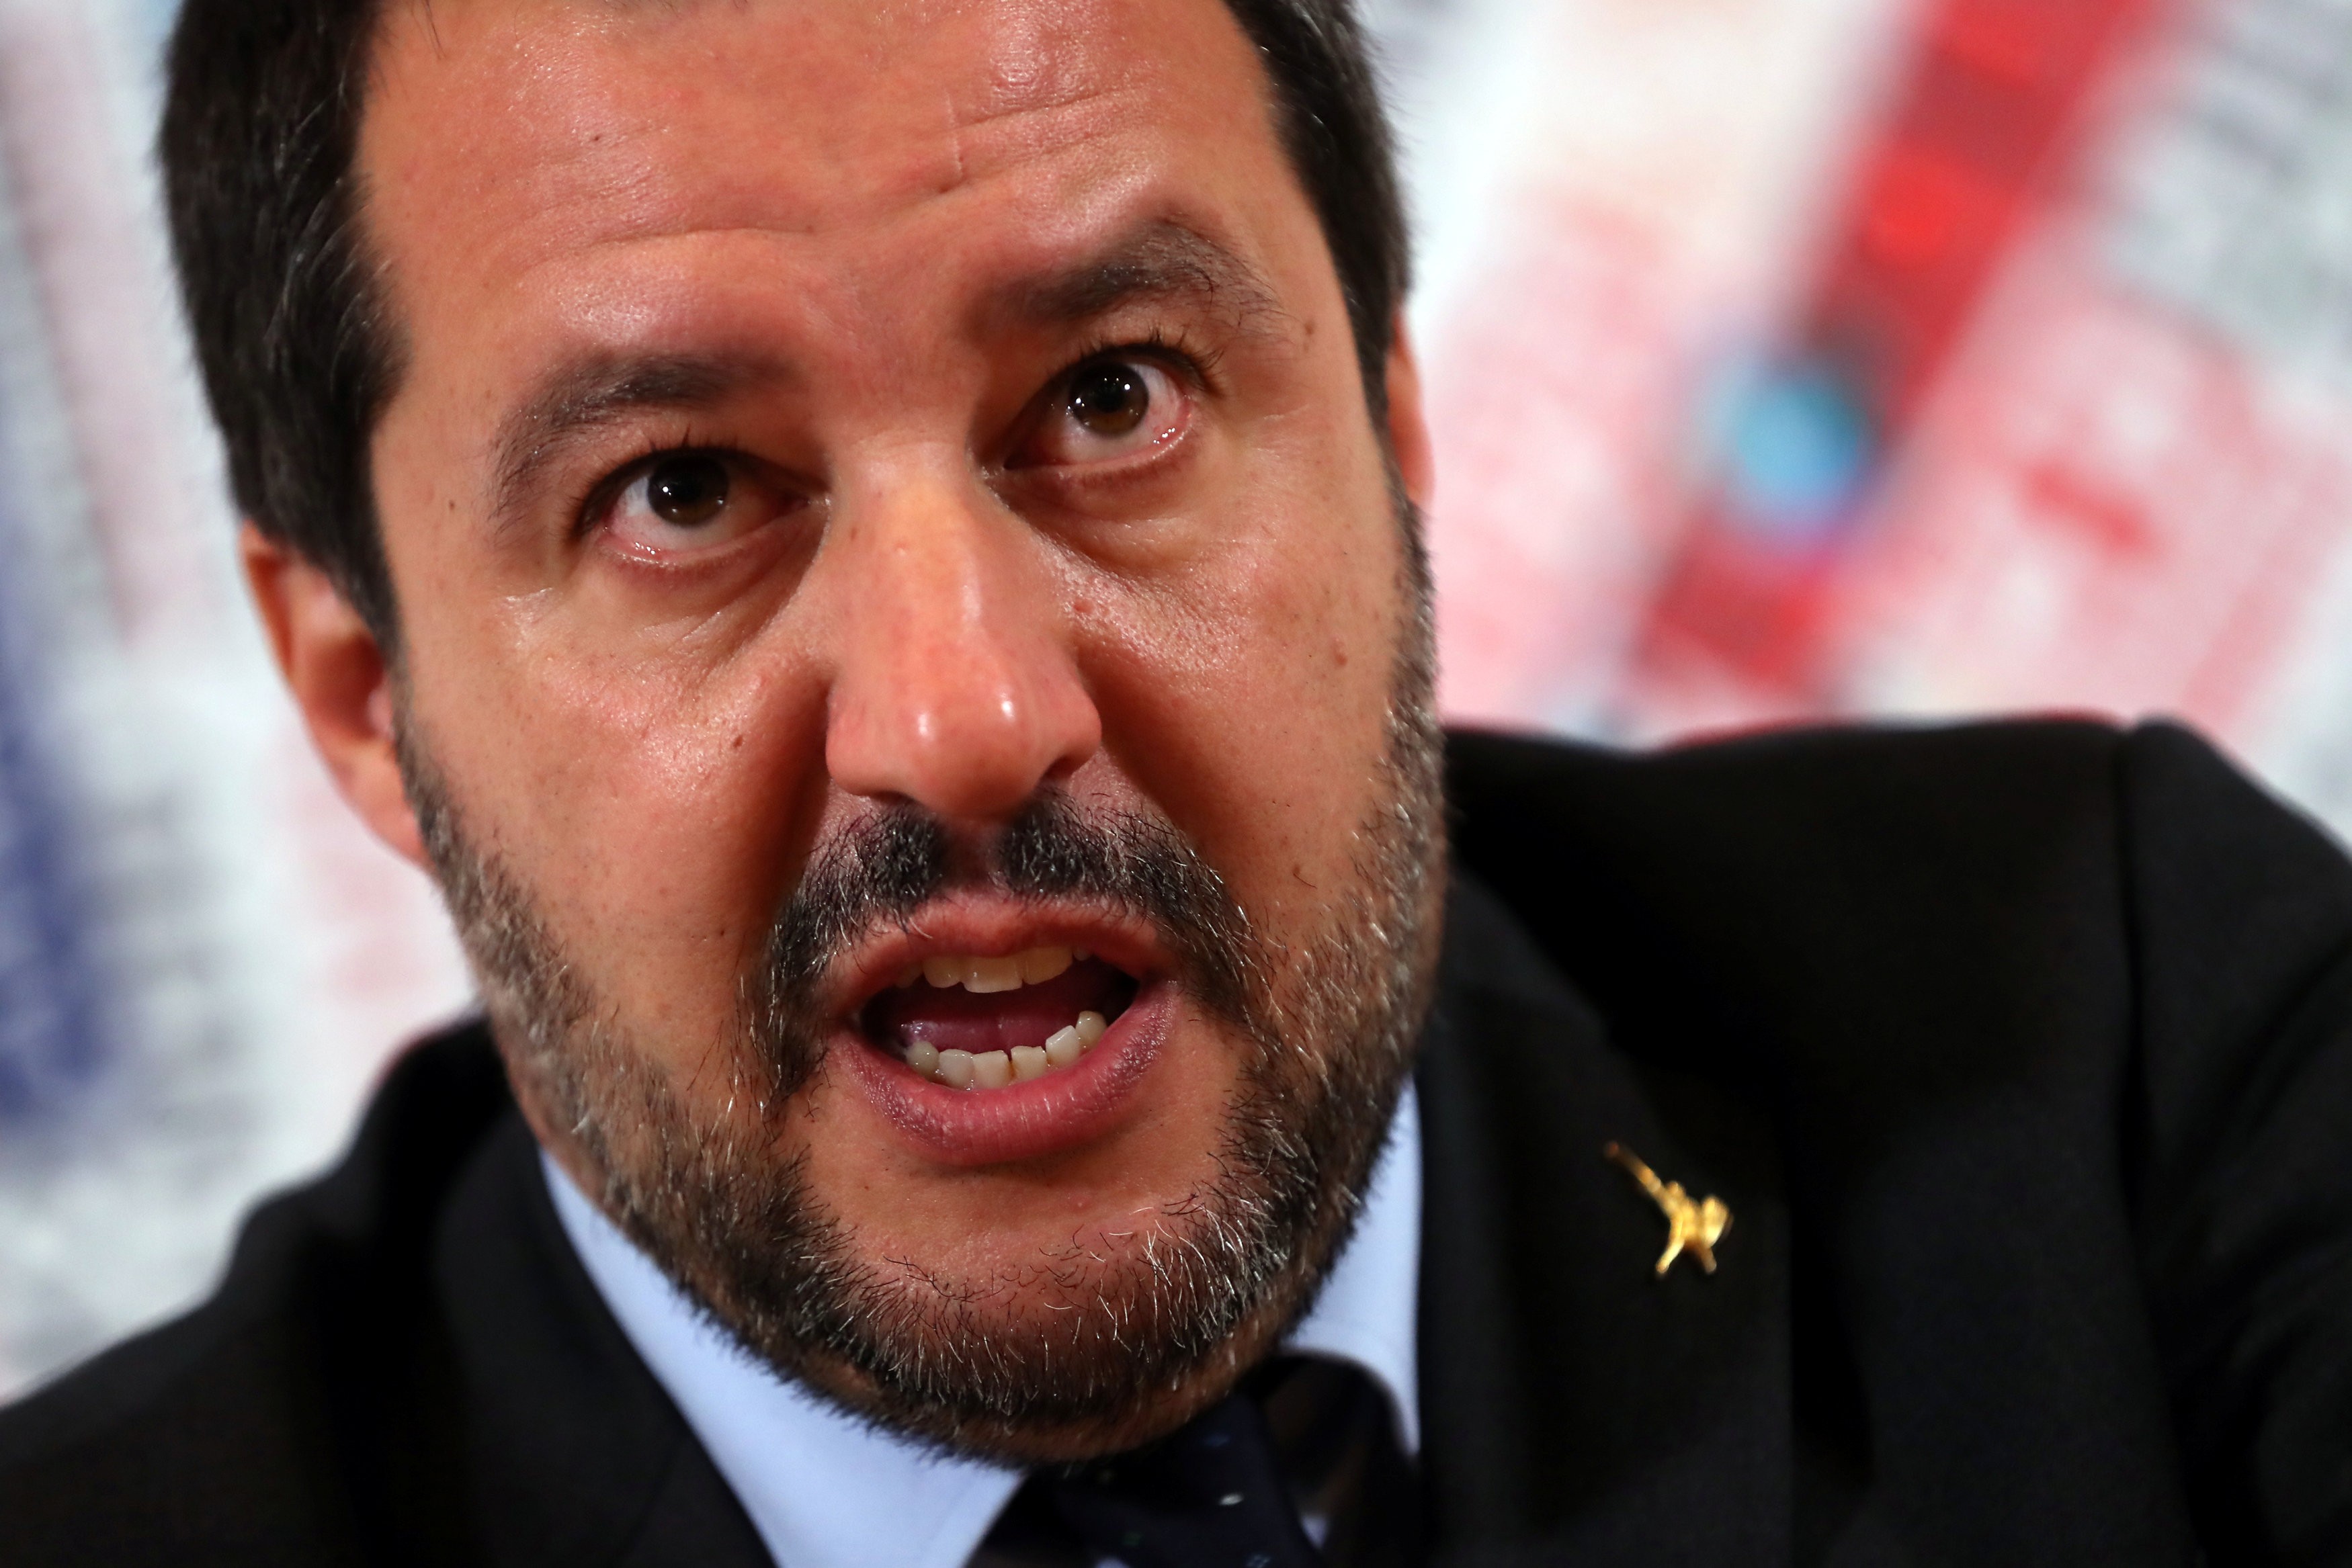 Italy’s Deputy Prime Minister Matteo Salvini, leader of the right-wing Northern League, is now leading an ideological offensive, declaring the arrival of a “new European spring” in May’s EU parliamentary elections. Photo: Reuters